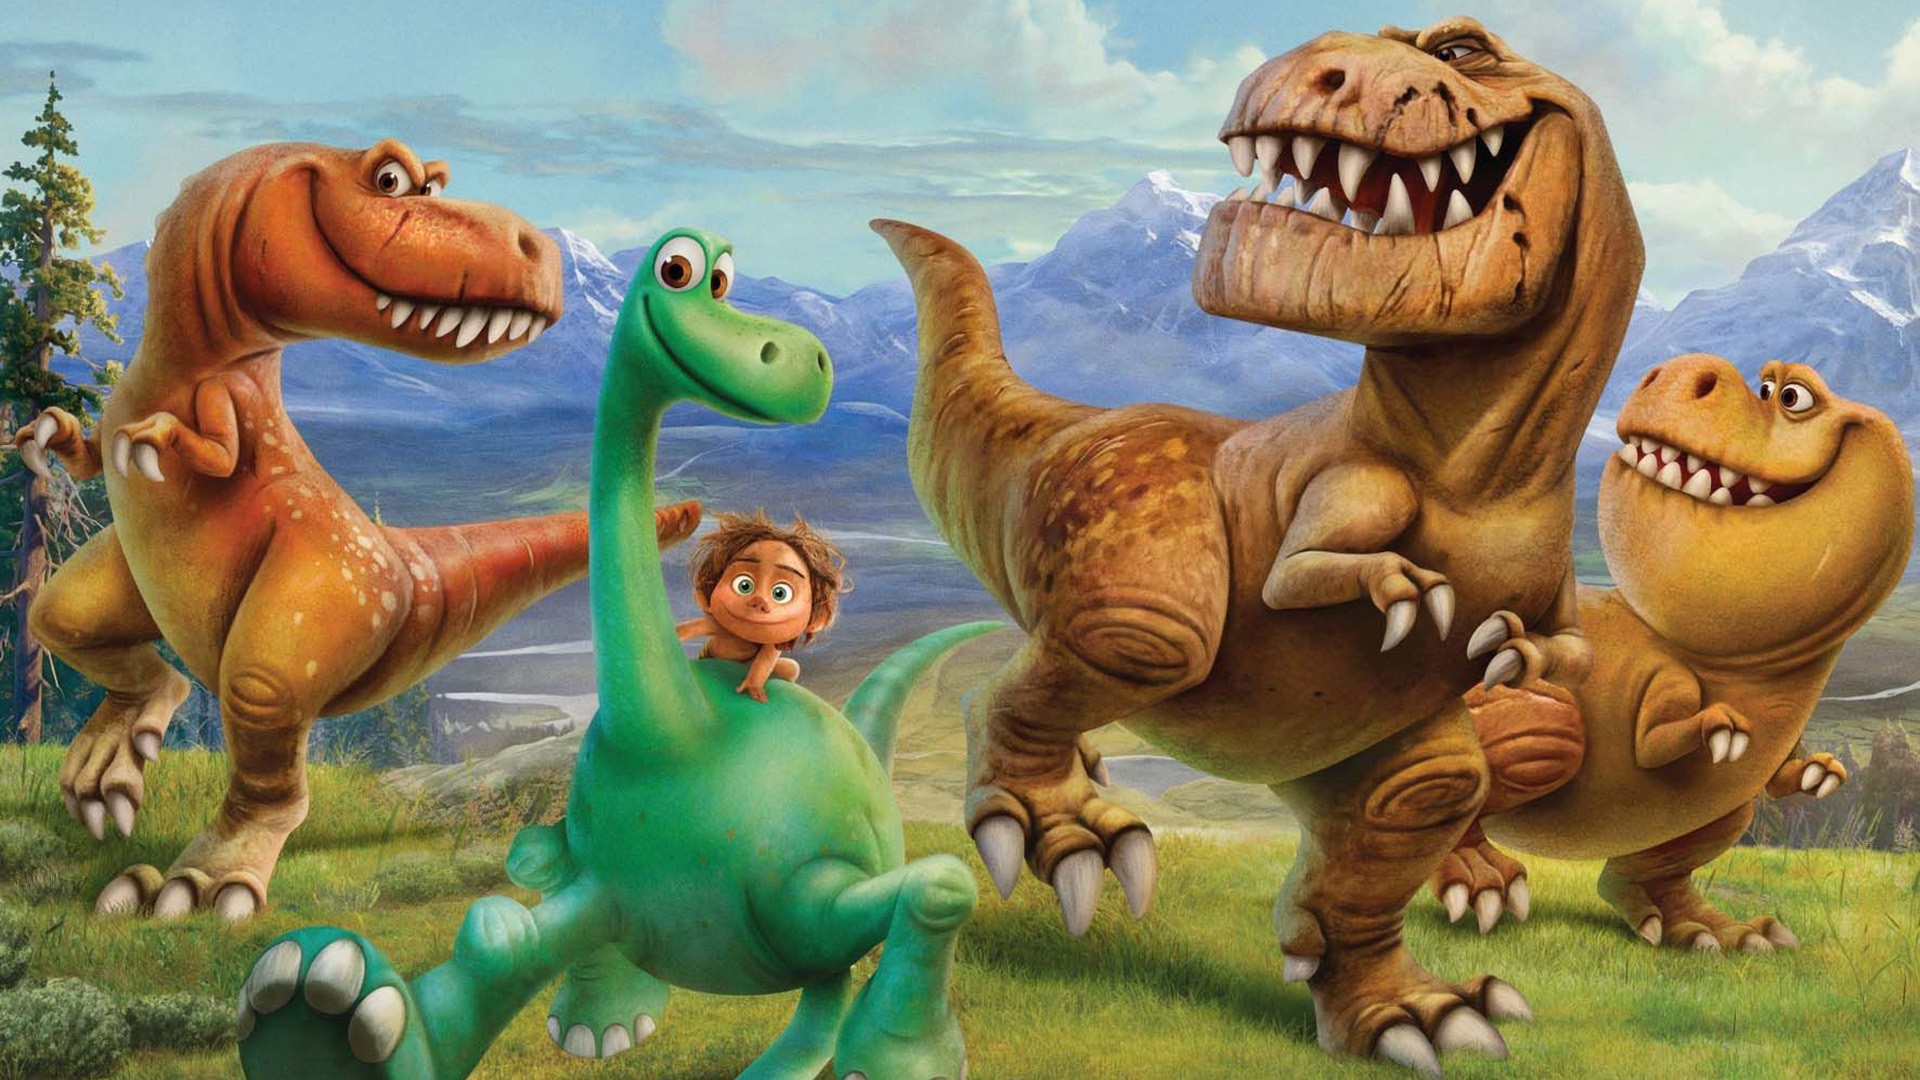 Arlo and Spot encounter a family of tyrannosaurs in The Good Dinosaur (2015)